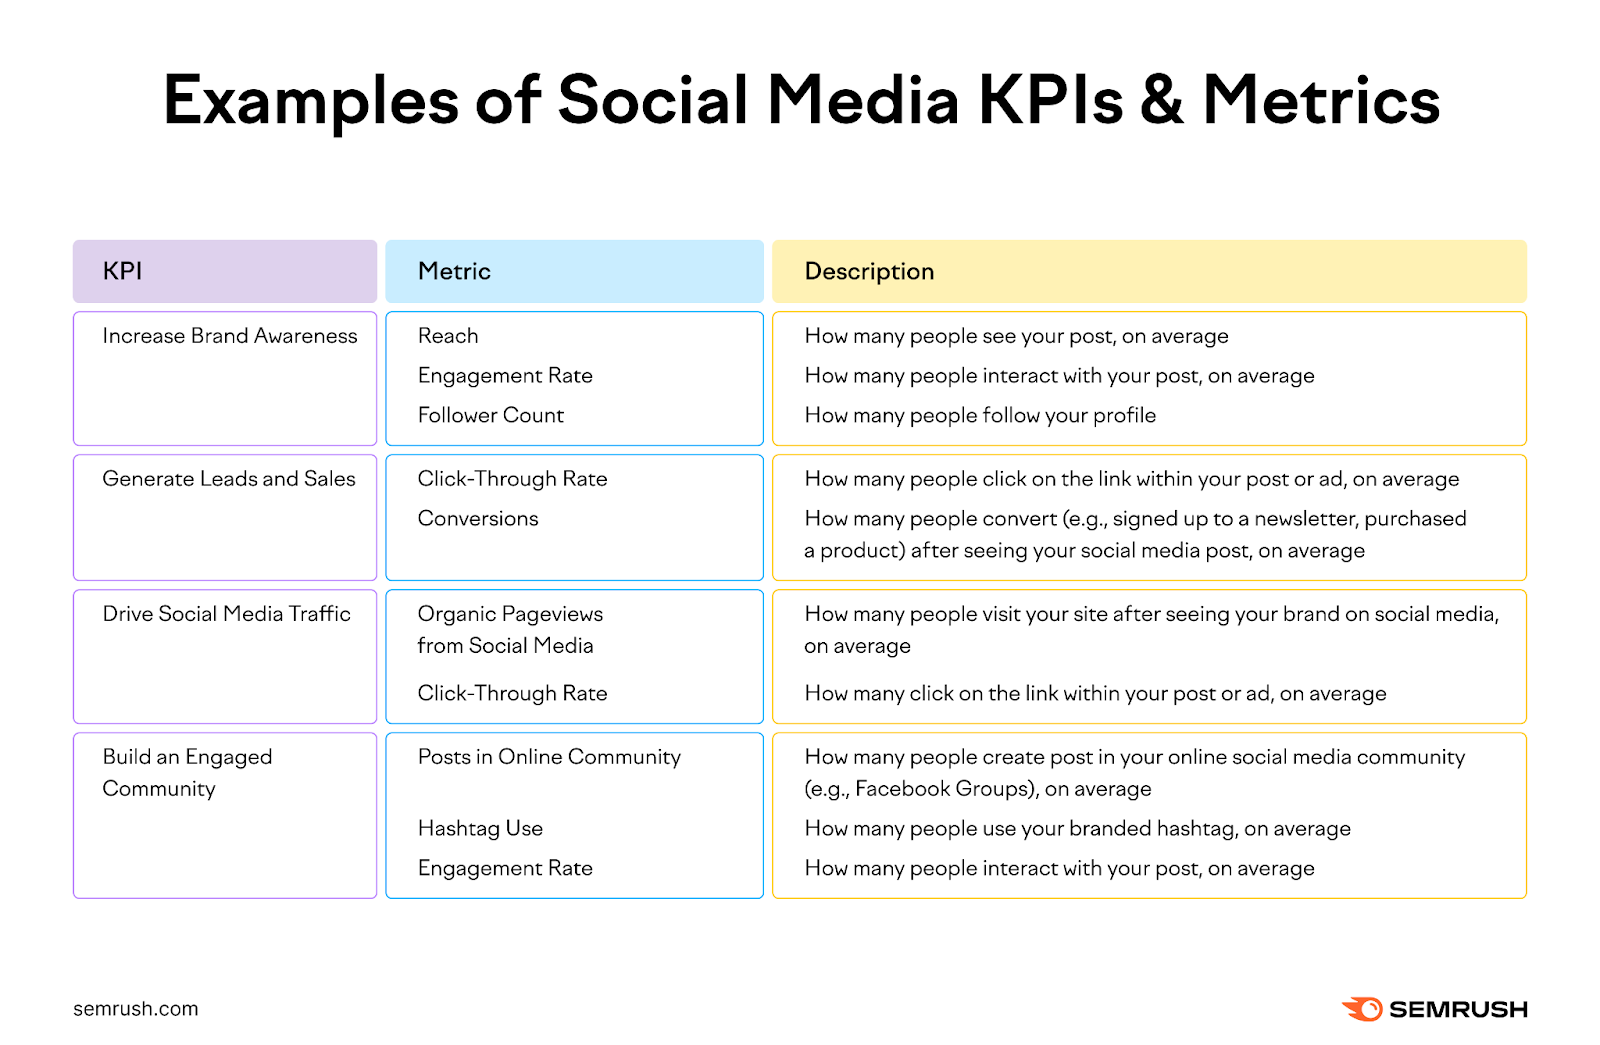 Examples of social media KPIs and metrics. For example the KPI increase brand awareness is tied to metrics like reach, engagement rate, and follower count.